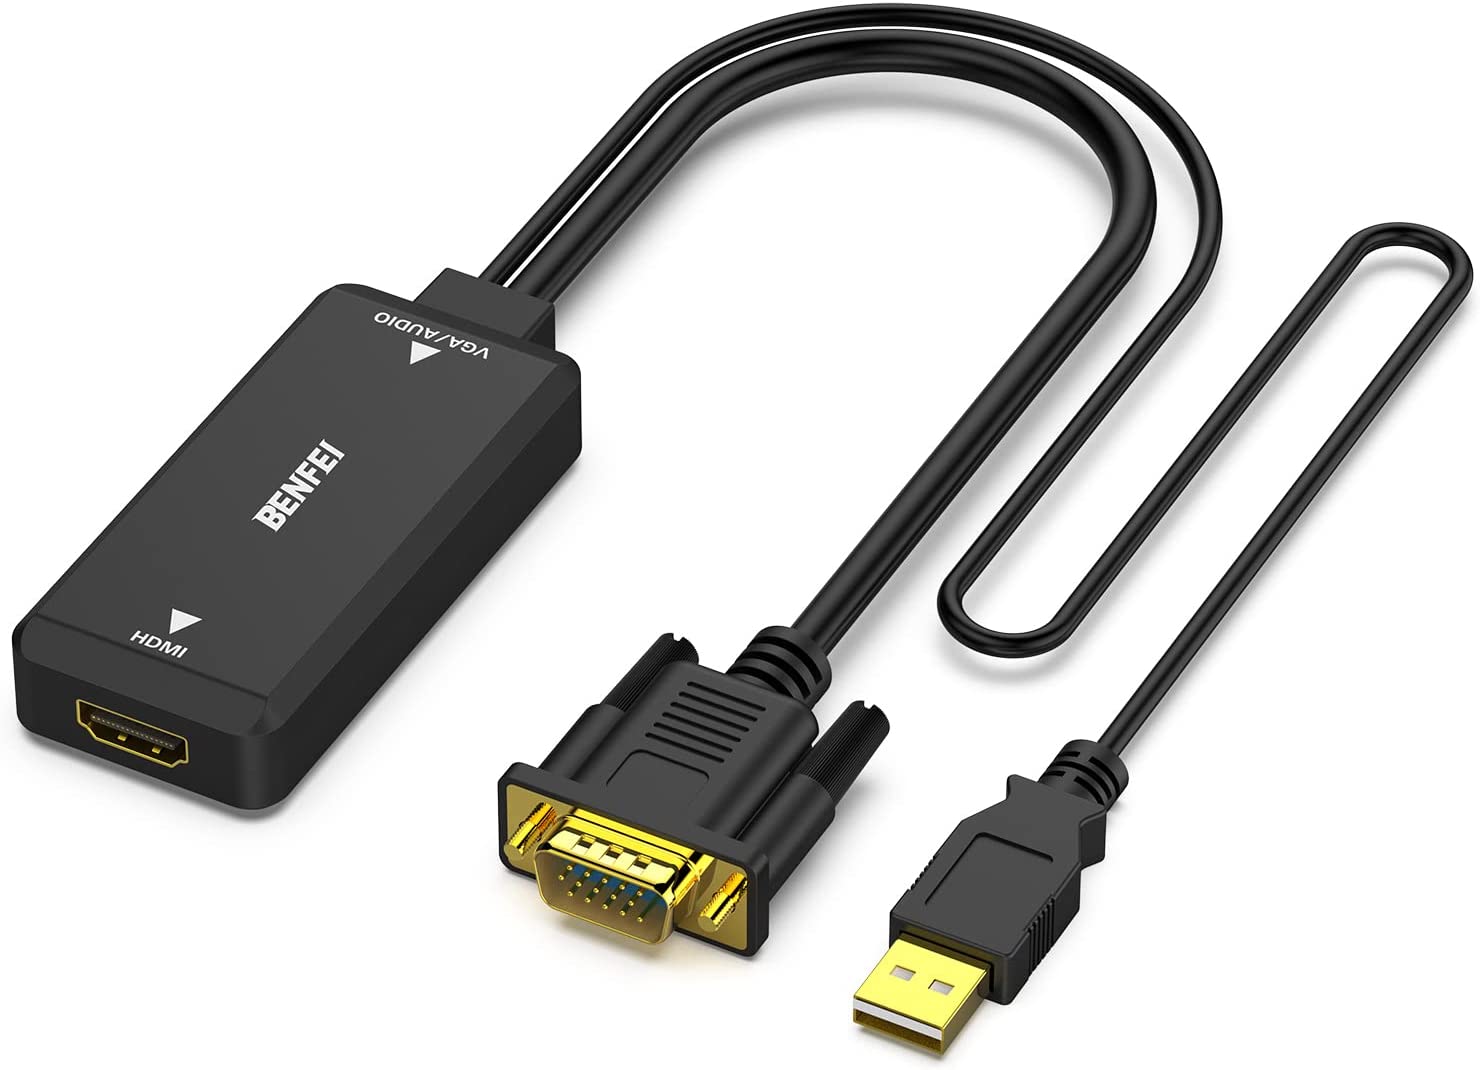 BENFEI HDMI to VGA 10 Feet Cable, Uni-Directional HDMI (Source) to VGA  (Display) Cable (Male to Male) Compatible for Computer, Desktop, Laptop,  PC